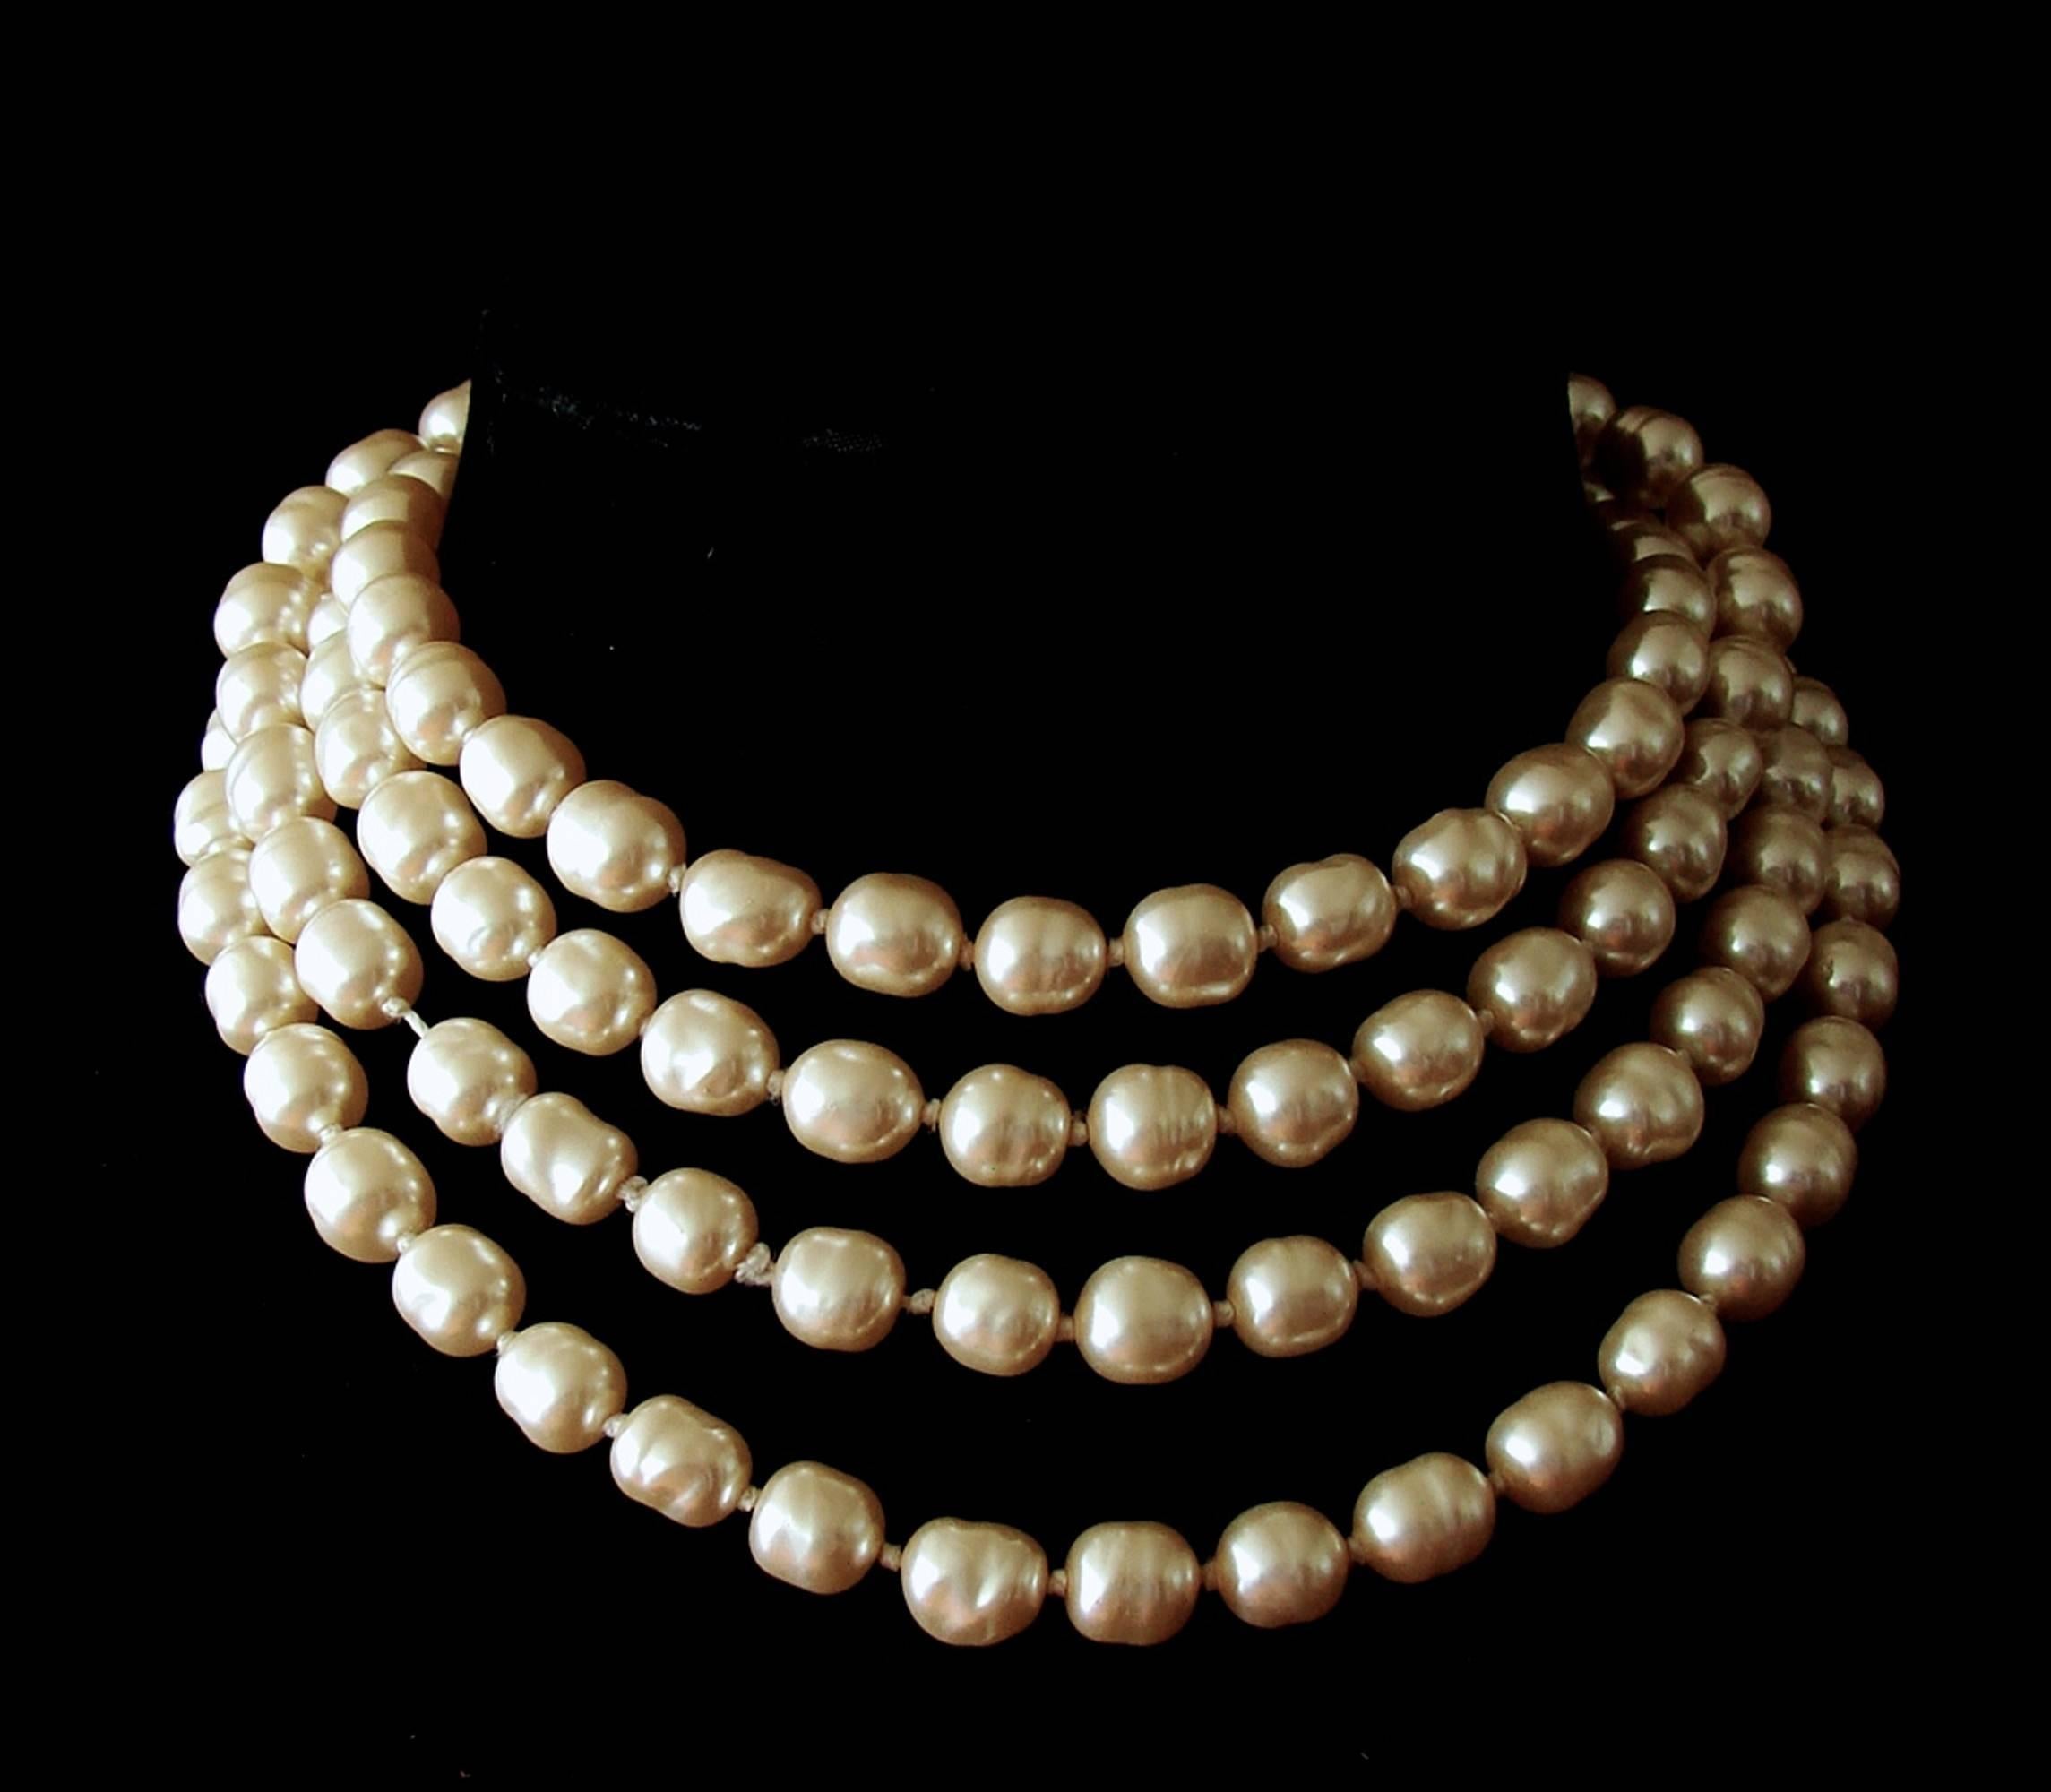 Here's an amazing single pearl strand infinity necklace from CHANEL that measures a whopping 65in long! In excellent condition overall with only minor signs of use - one silk cord knot has very minor fraying and impacts the pearl spacing depending